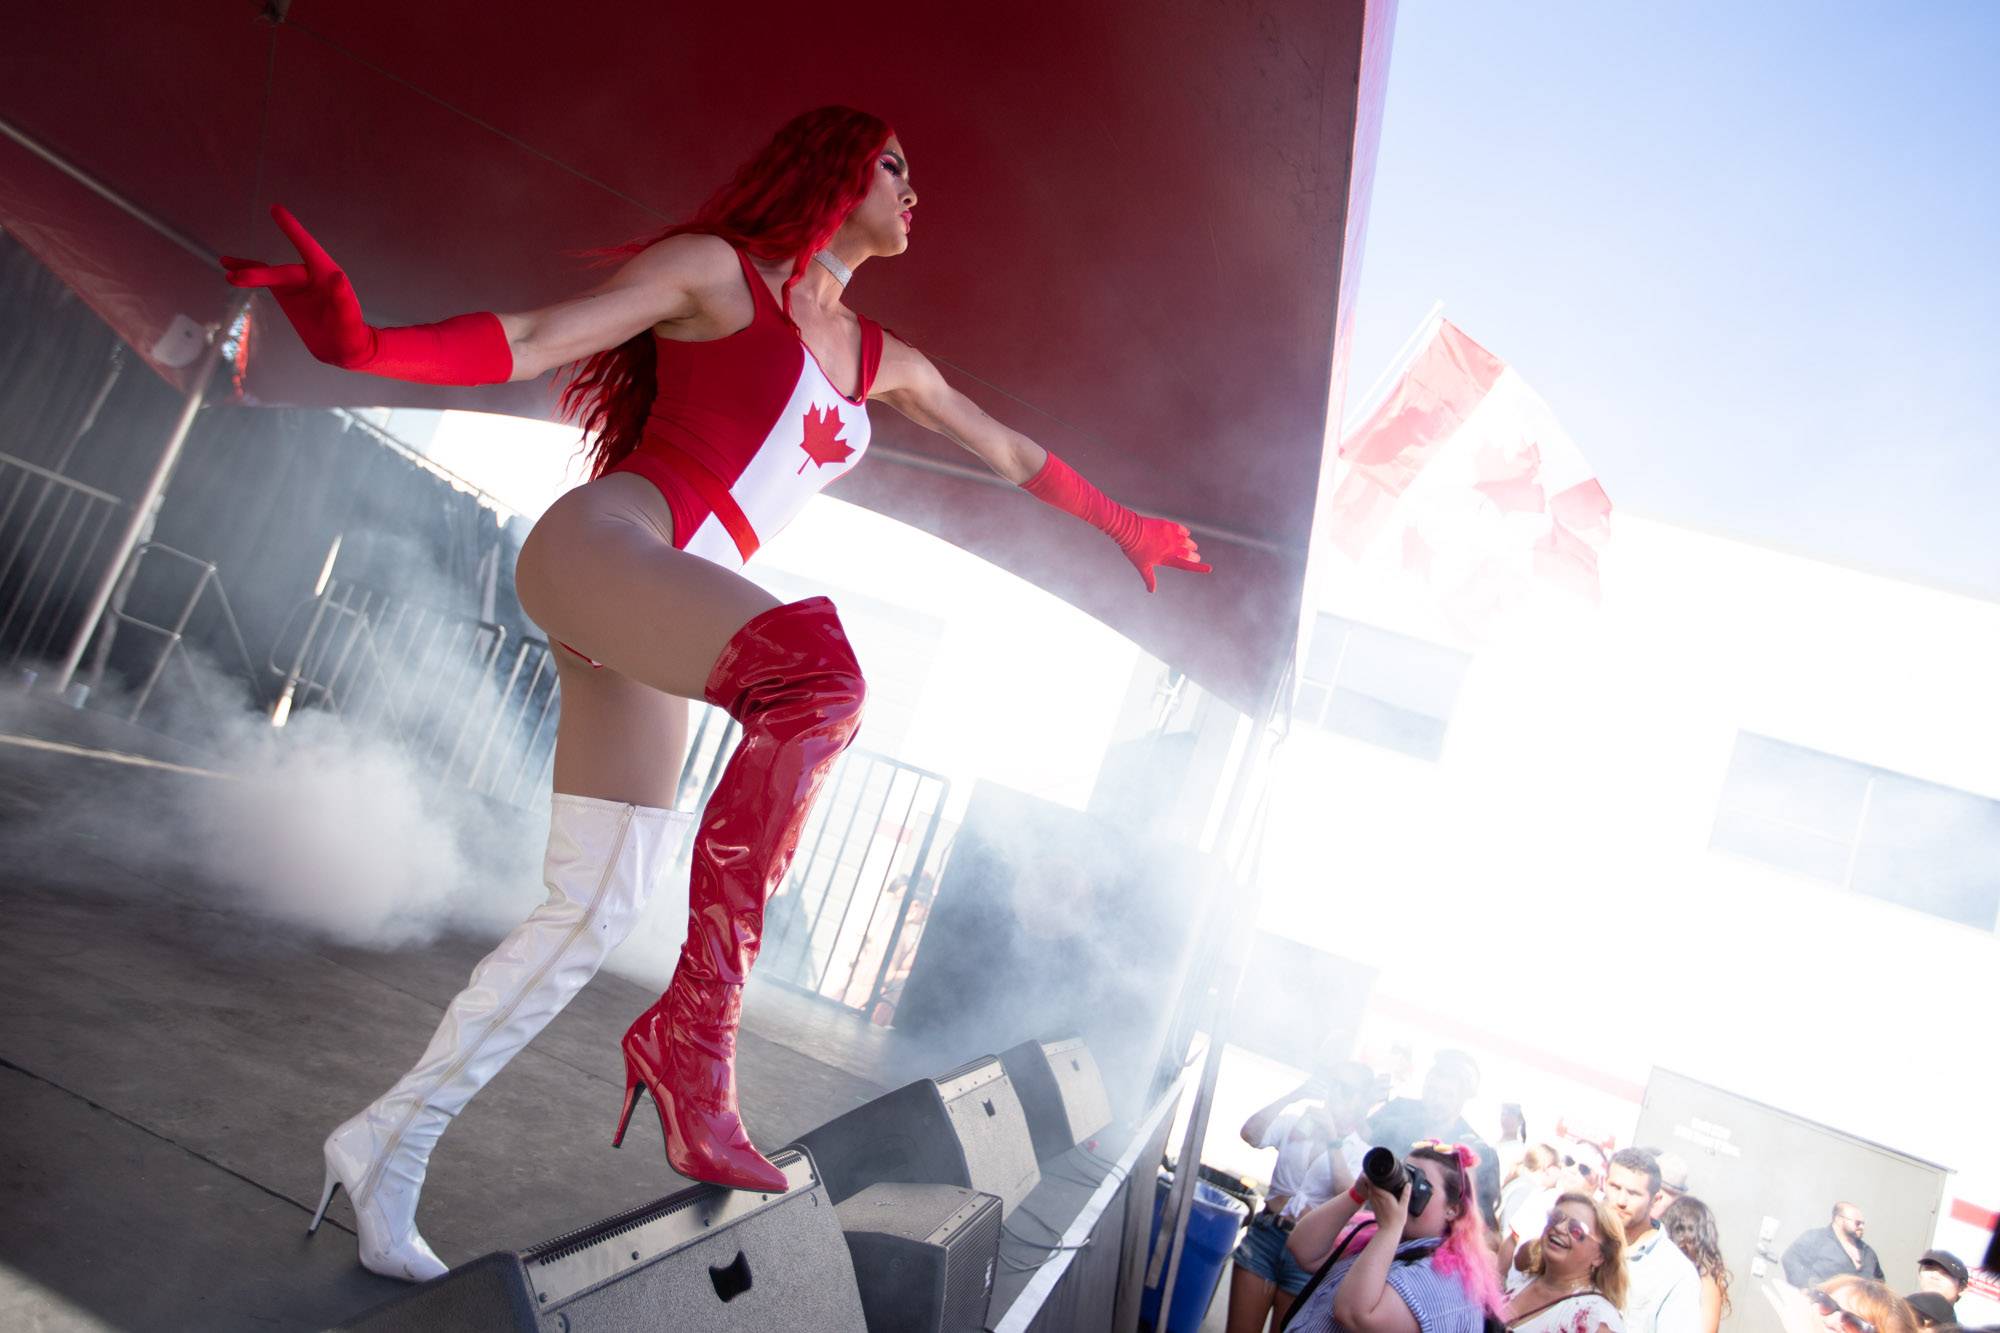 Drag Show at the Red Truck Canada Day Block Party, Vancouver, Jun 30 2019. Kirk Chantraine photo.